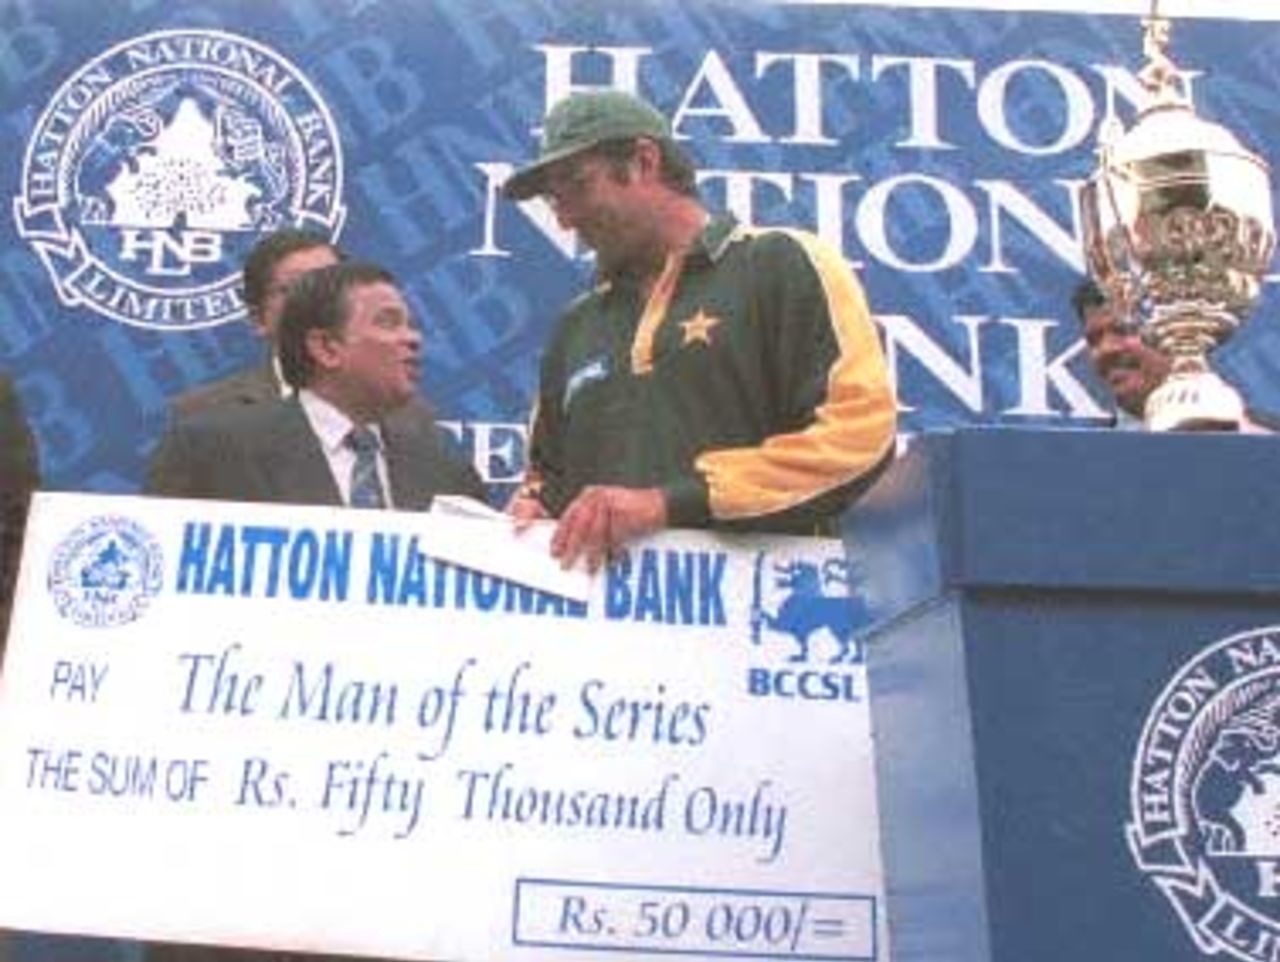 Pakistan player Wazim Akram receeives his cheque for man of the series 02 July 2000 after the third and final Test against Sri Lanka was abandoned due to rain. Pakistan won the three test series 2-0. Pakistan in Sri Lanka 1999/00, 3rd Test, Sri Lanka v Pakistan Asgiriya Stadium, Kandy, 28 June - 02 July 2000 (Day  5)